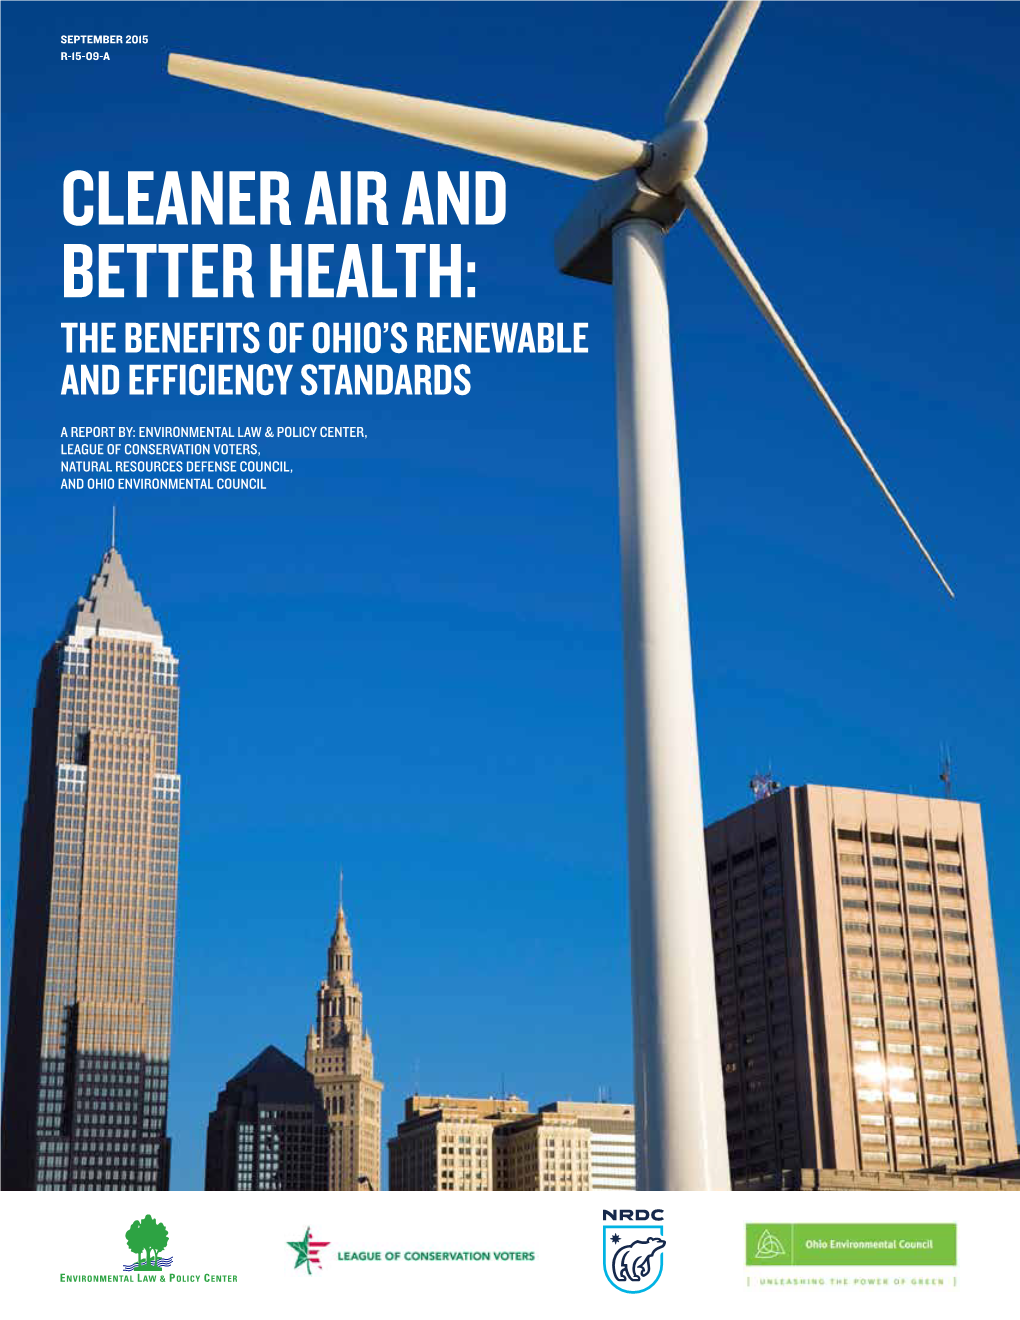 The Benefits of Ohio's Renewable and Efficiency Standards